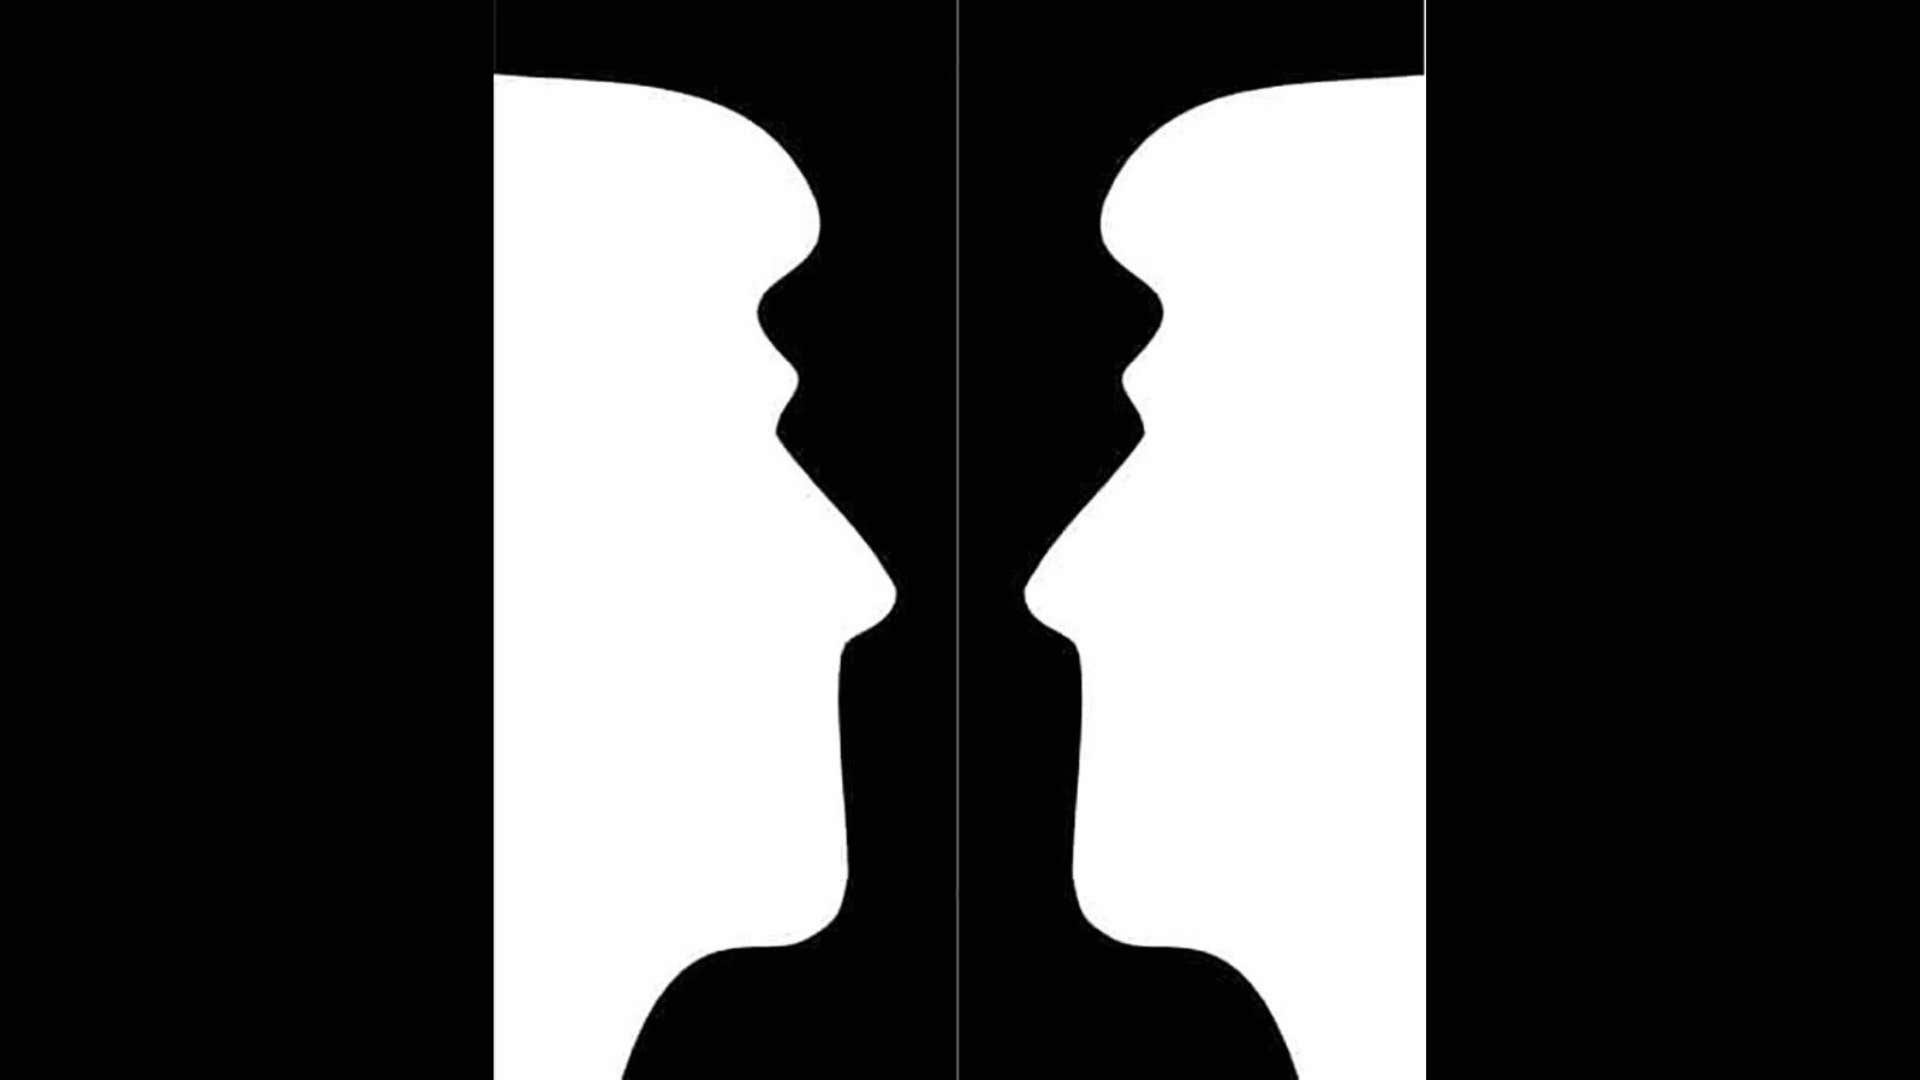 optical illusion faces or candlestick